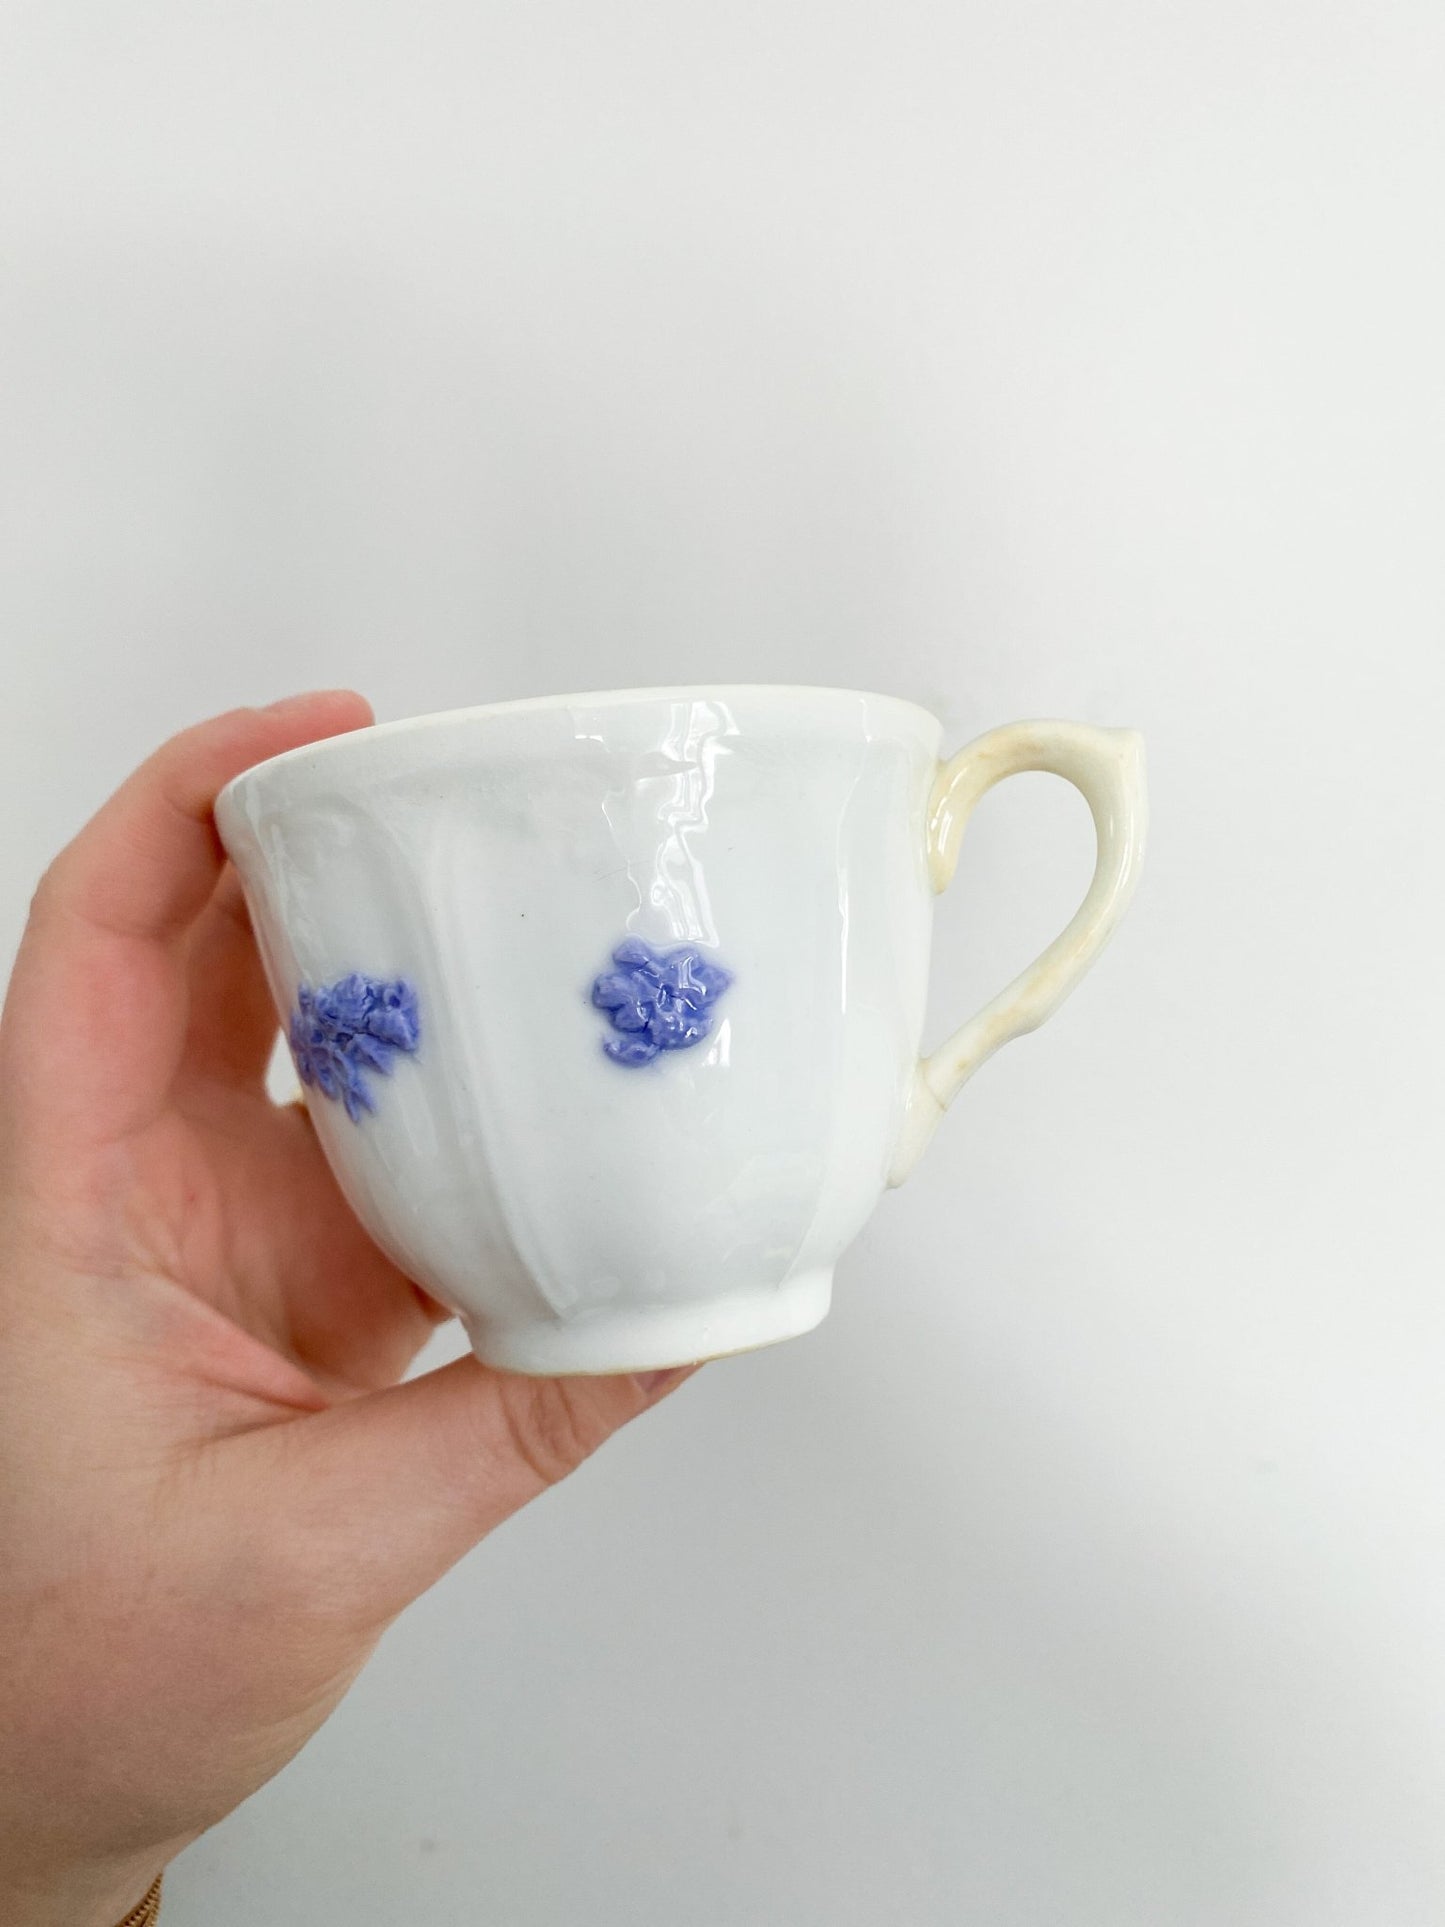 A woman holds the teacup in her hand. The teacup shows off the violet flowers, the handle is slightly yellowing and pointed to the right.